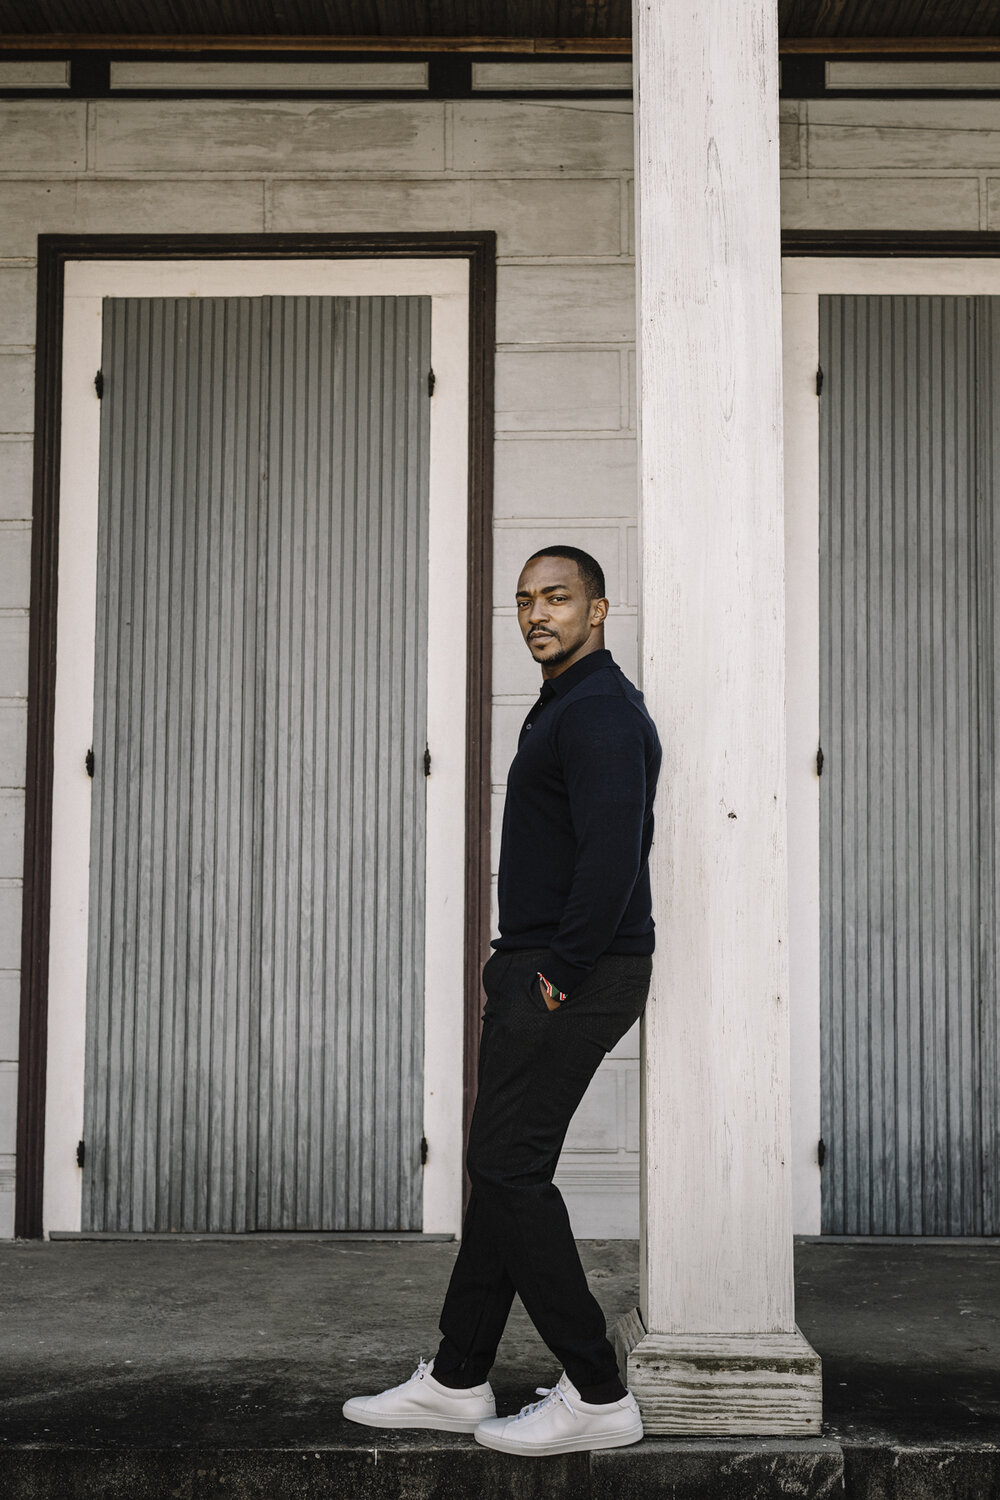  NEW ORLEANS, LA - Feb. 19, 2021 - Actor Anthony Mackie photographed in the Tremé District of New Orleans. 